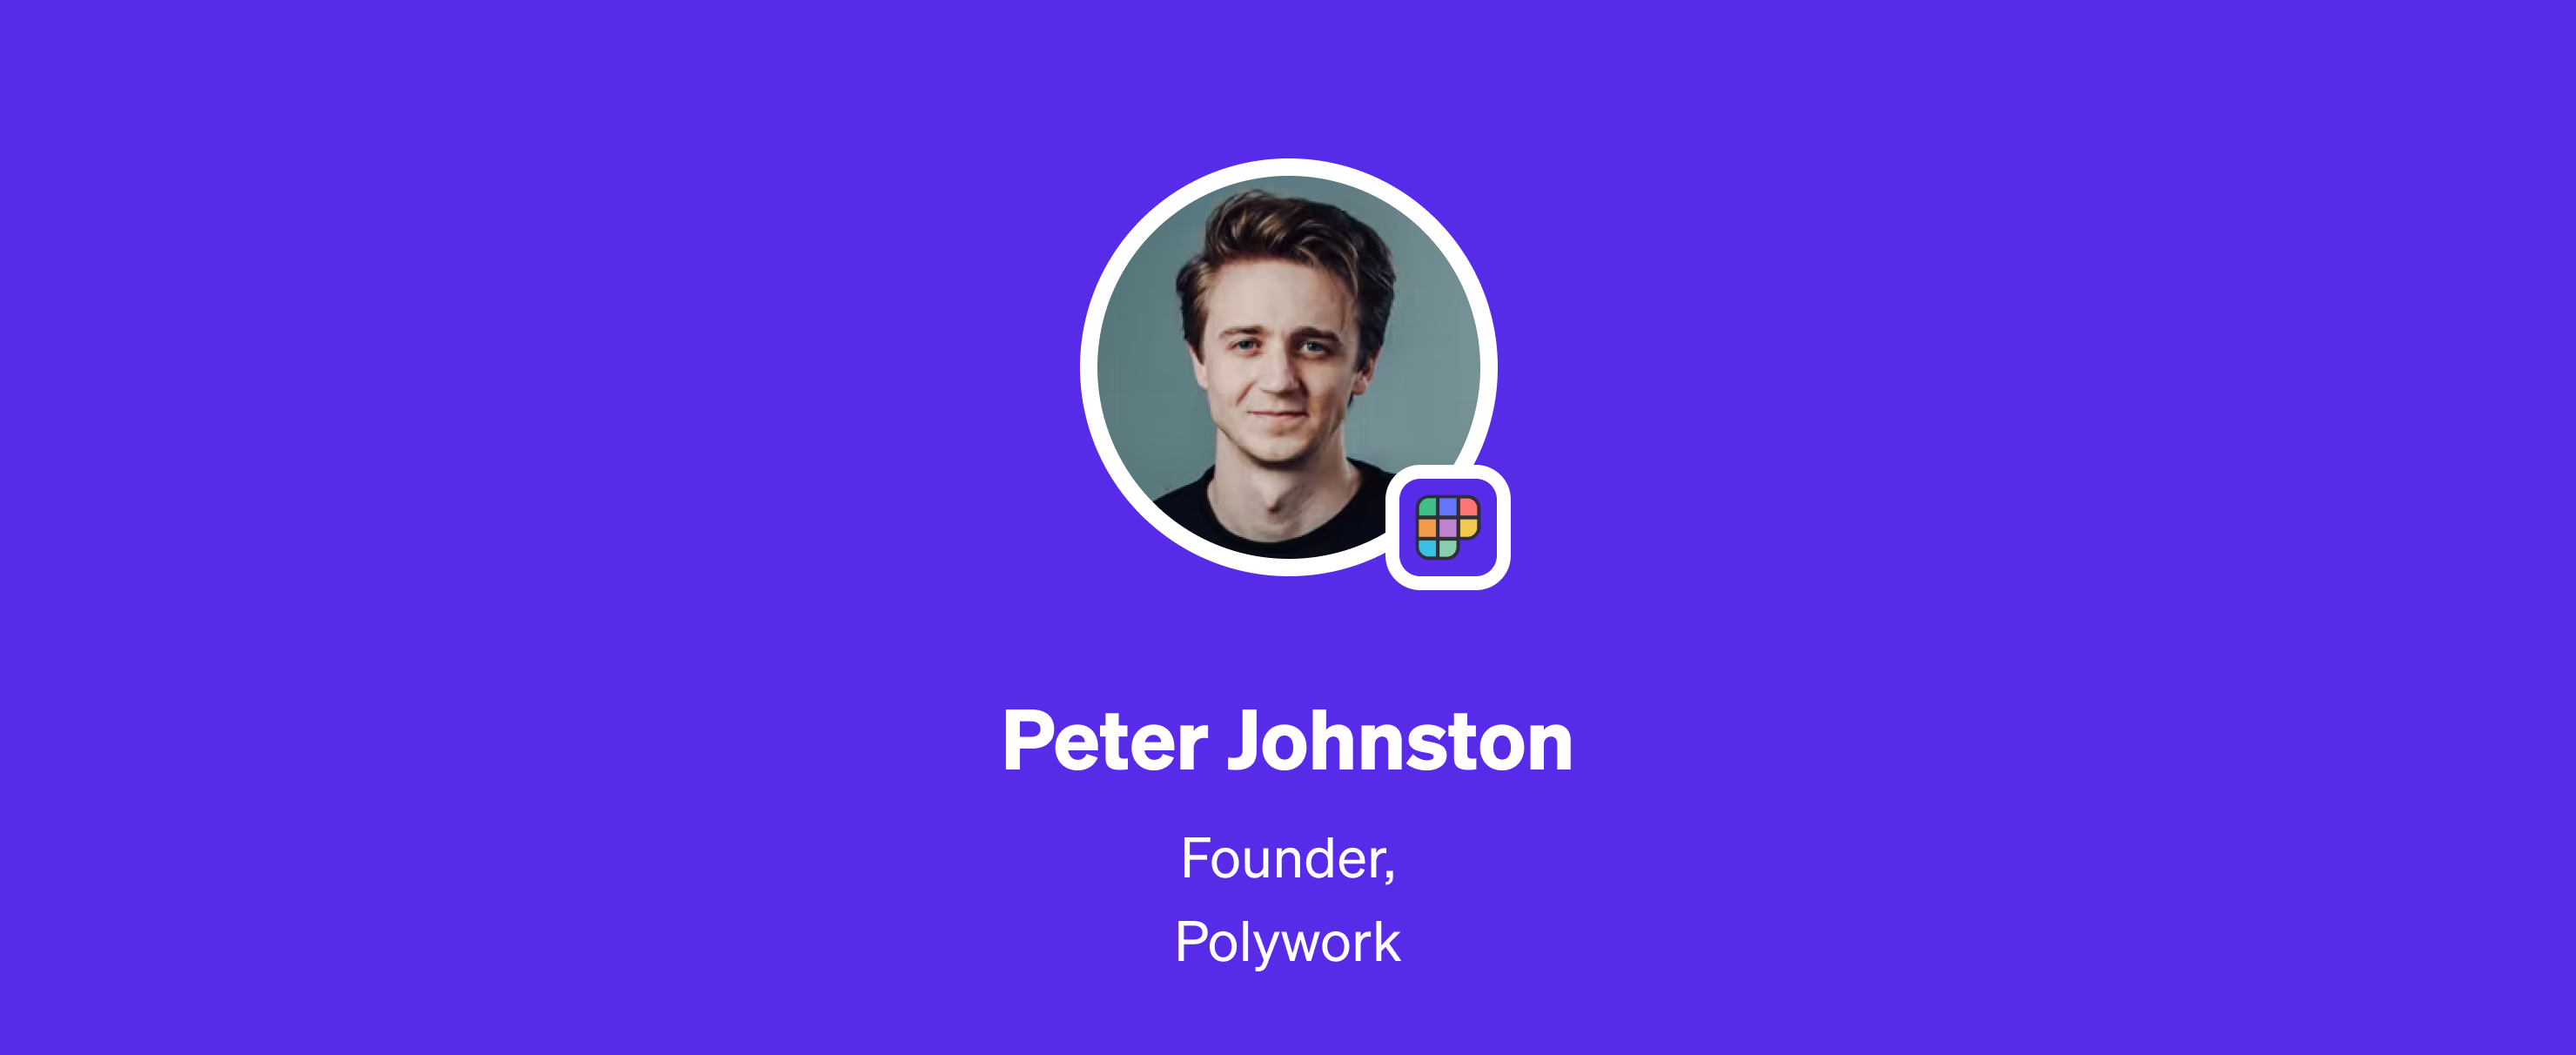 How Peter Johnston is building Polywork, the world’s most powerful people search engine